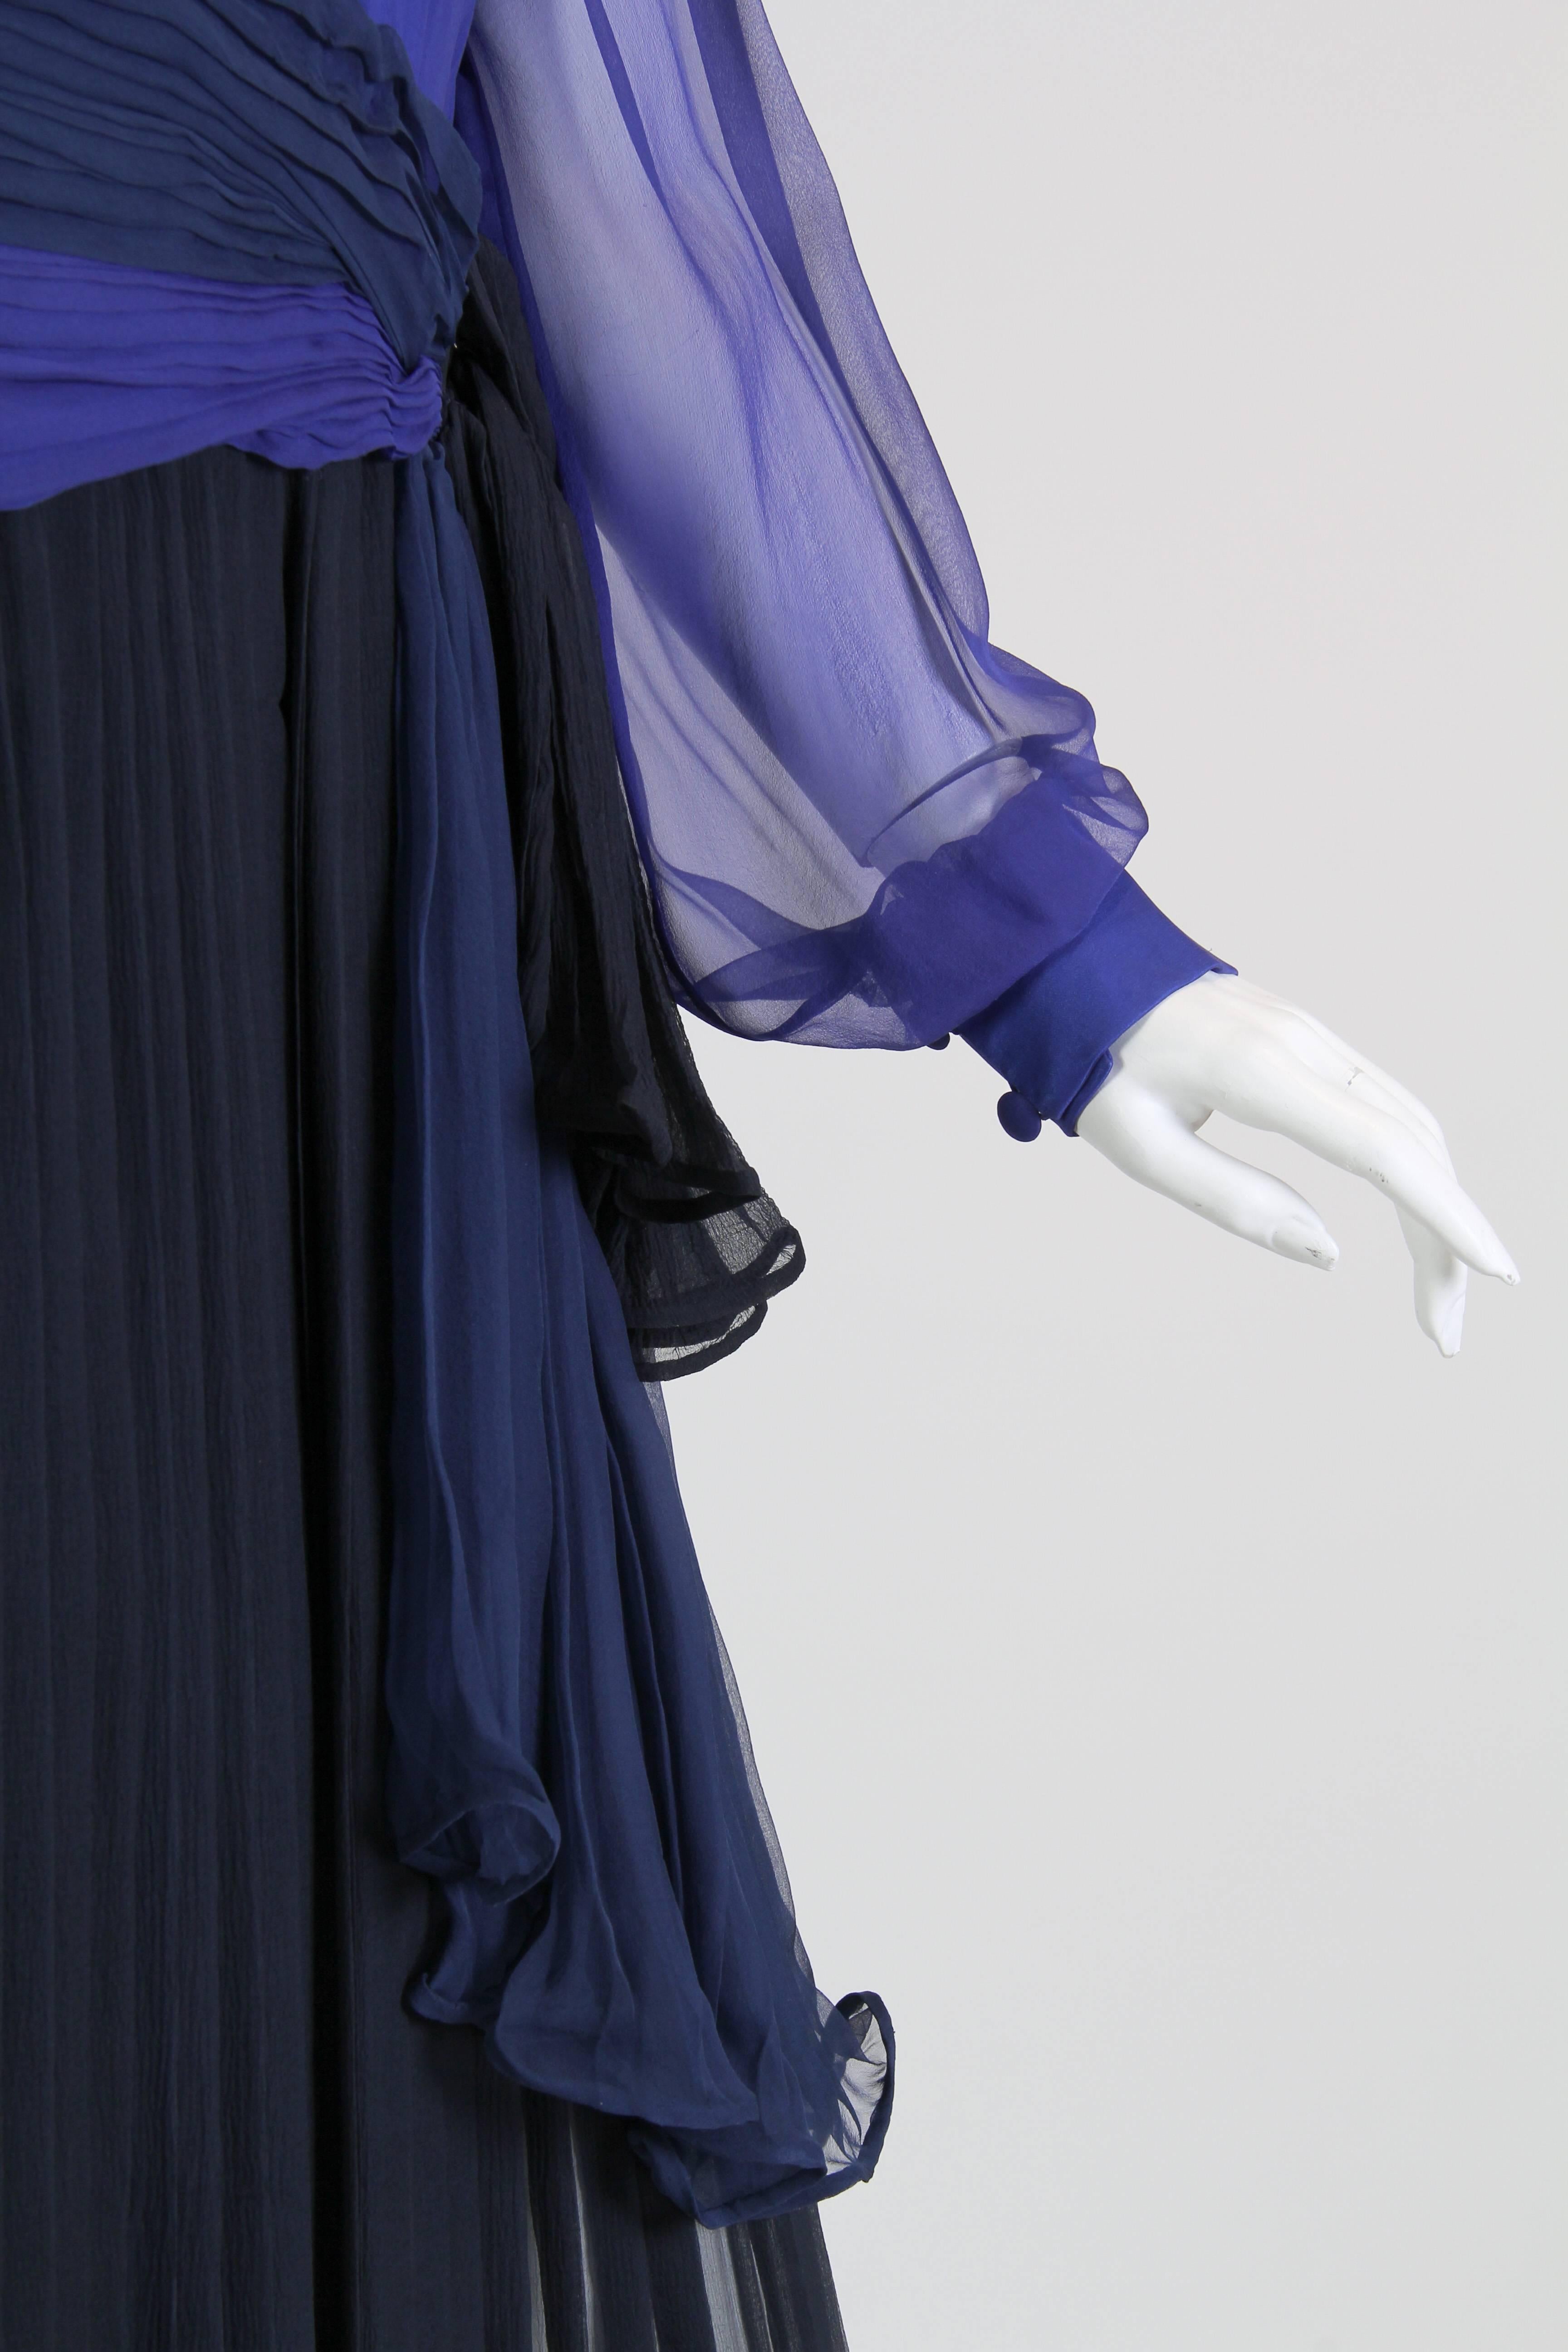 1980S ANDRE LAUG Haute Couture Silk Chiffon Cocktail Dress In Shades Of Blues W For Sale 3